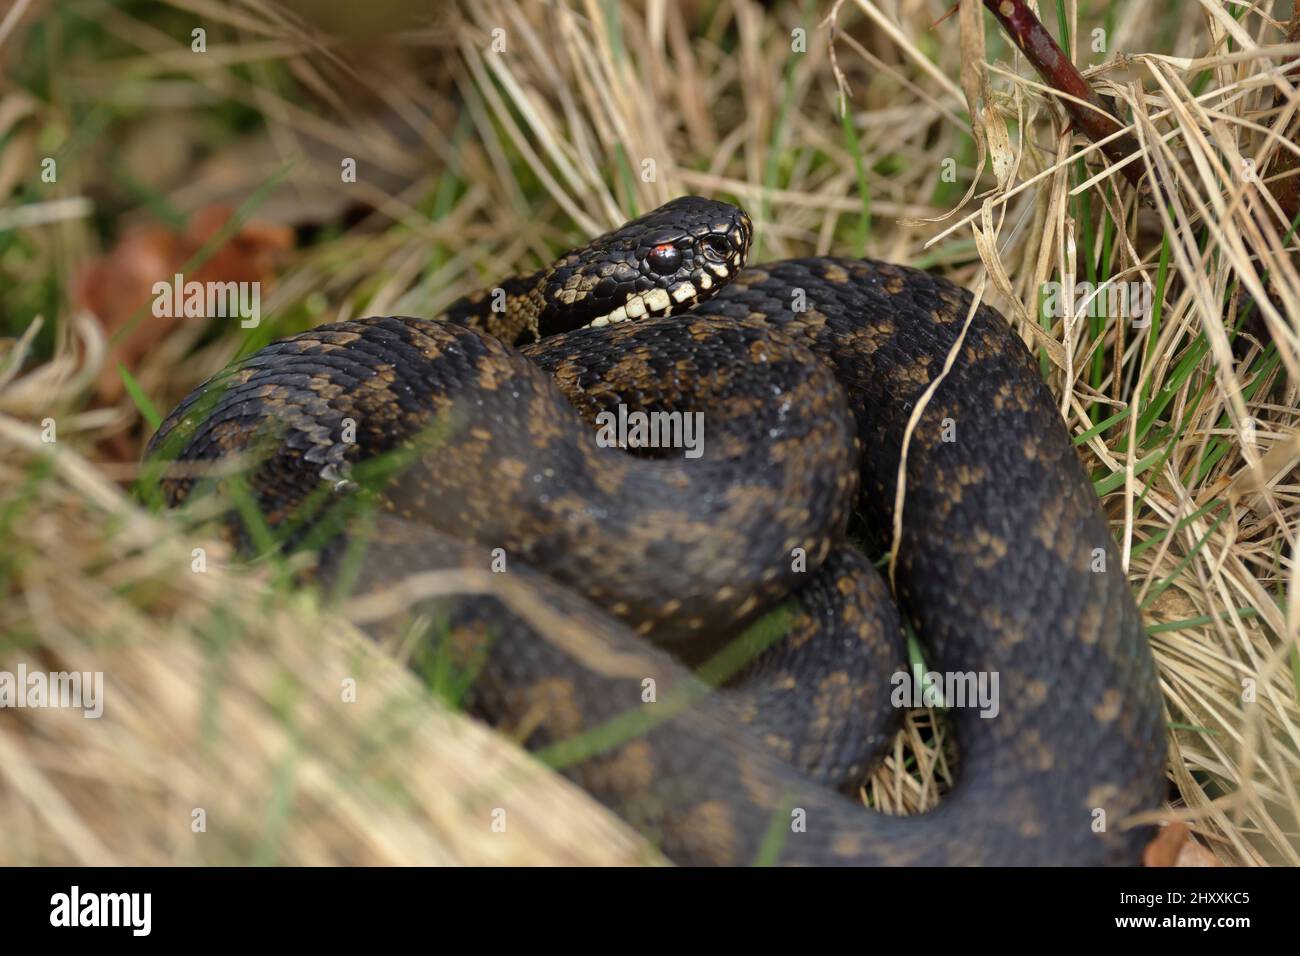 Vipera berus, the common European adder or common European viper, is a venomous snake that is extremely widespread. Stock Photo